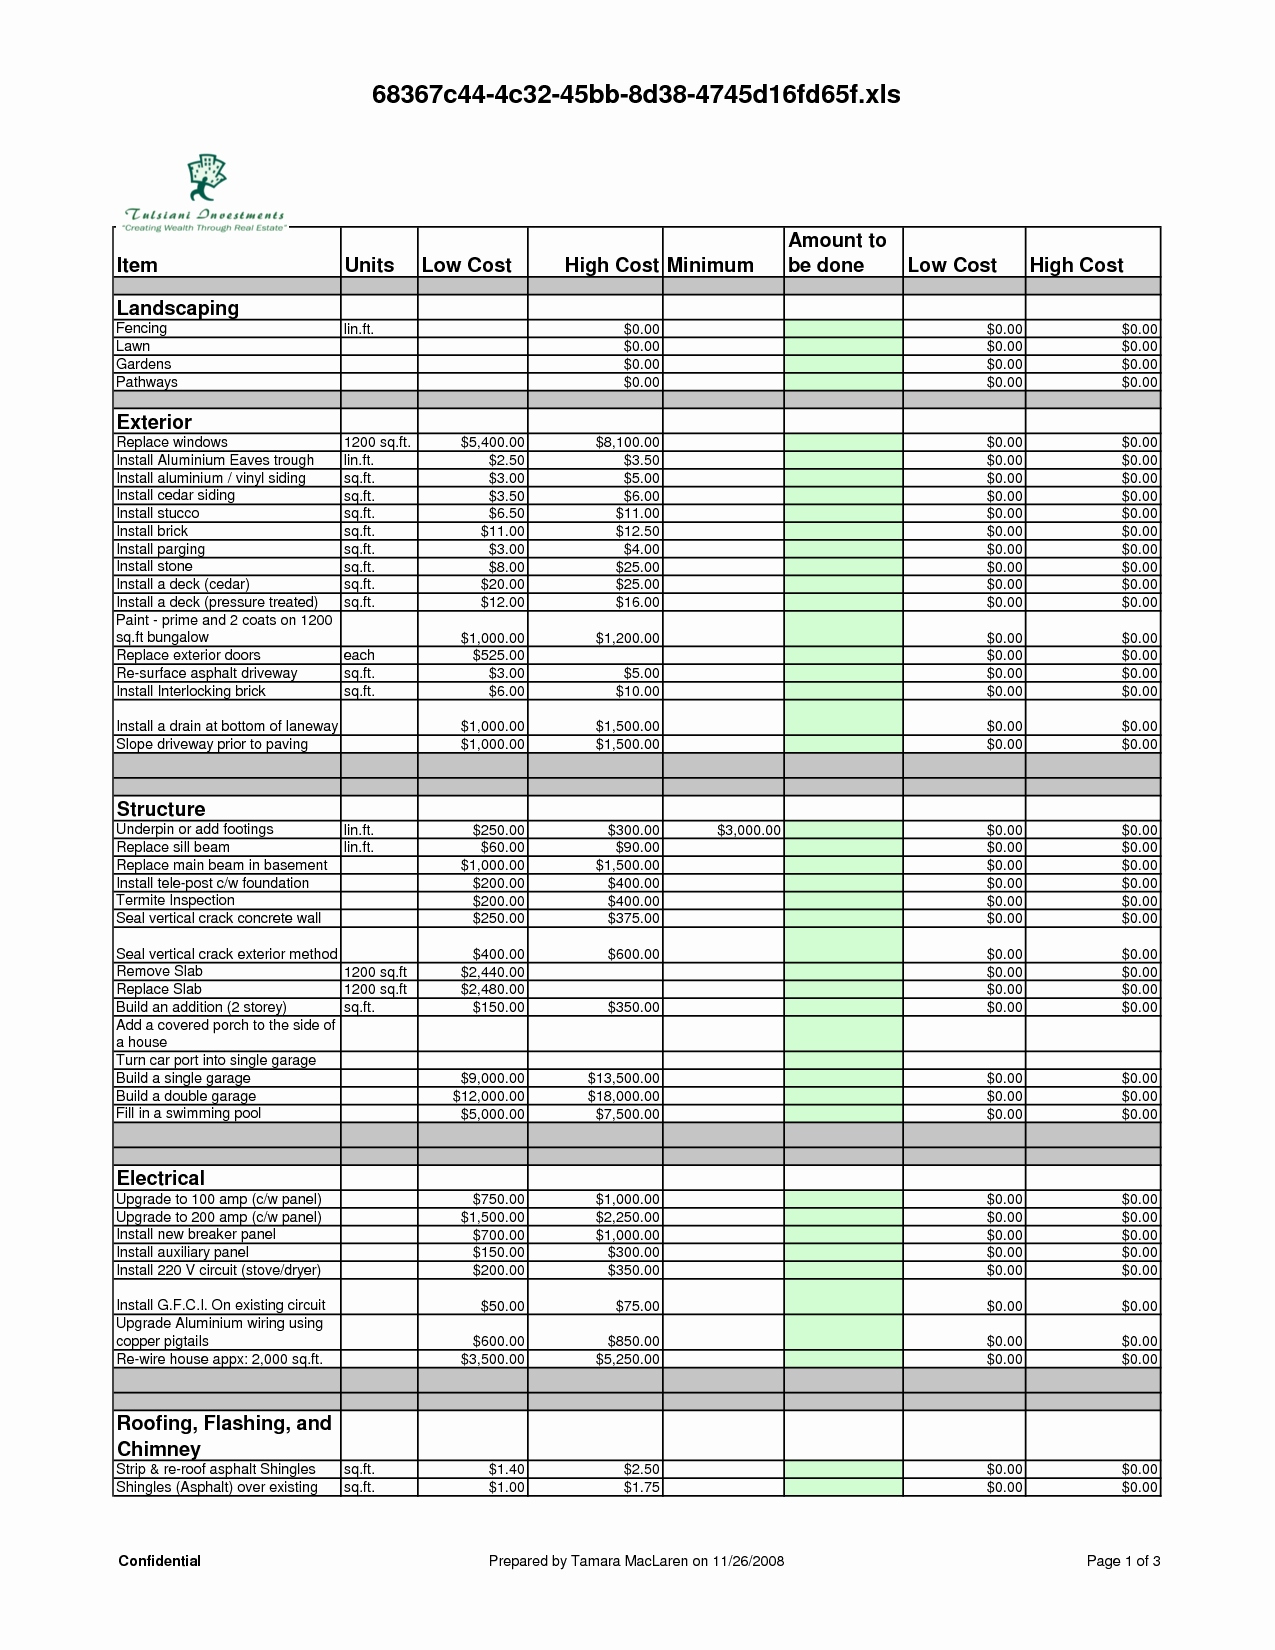 Free Electrical Estimating Excel Spreadsheet pertaining to Residential Construction Cost Breakdown Excel Lovely Estimating With